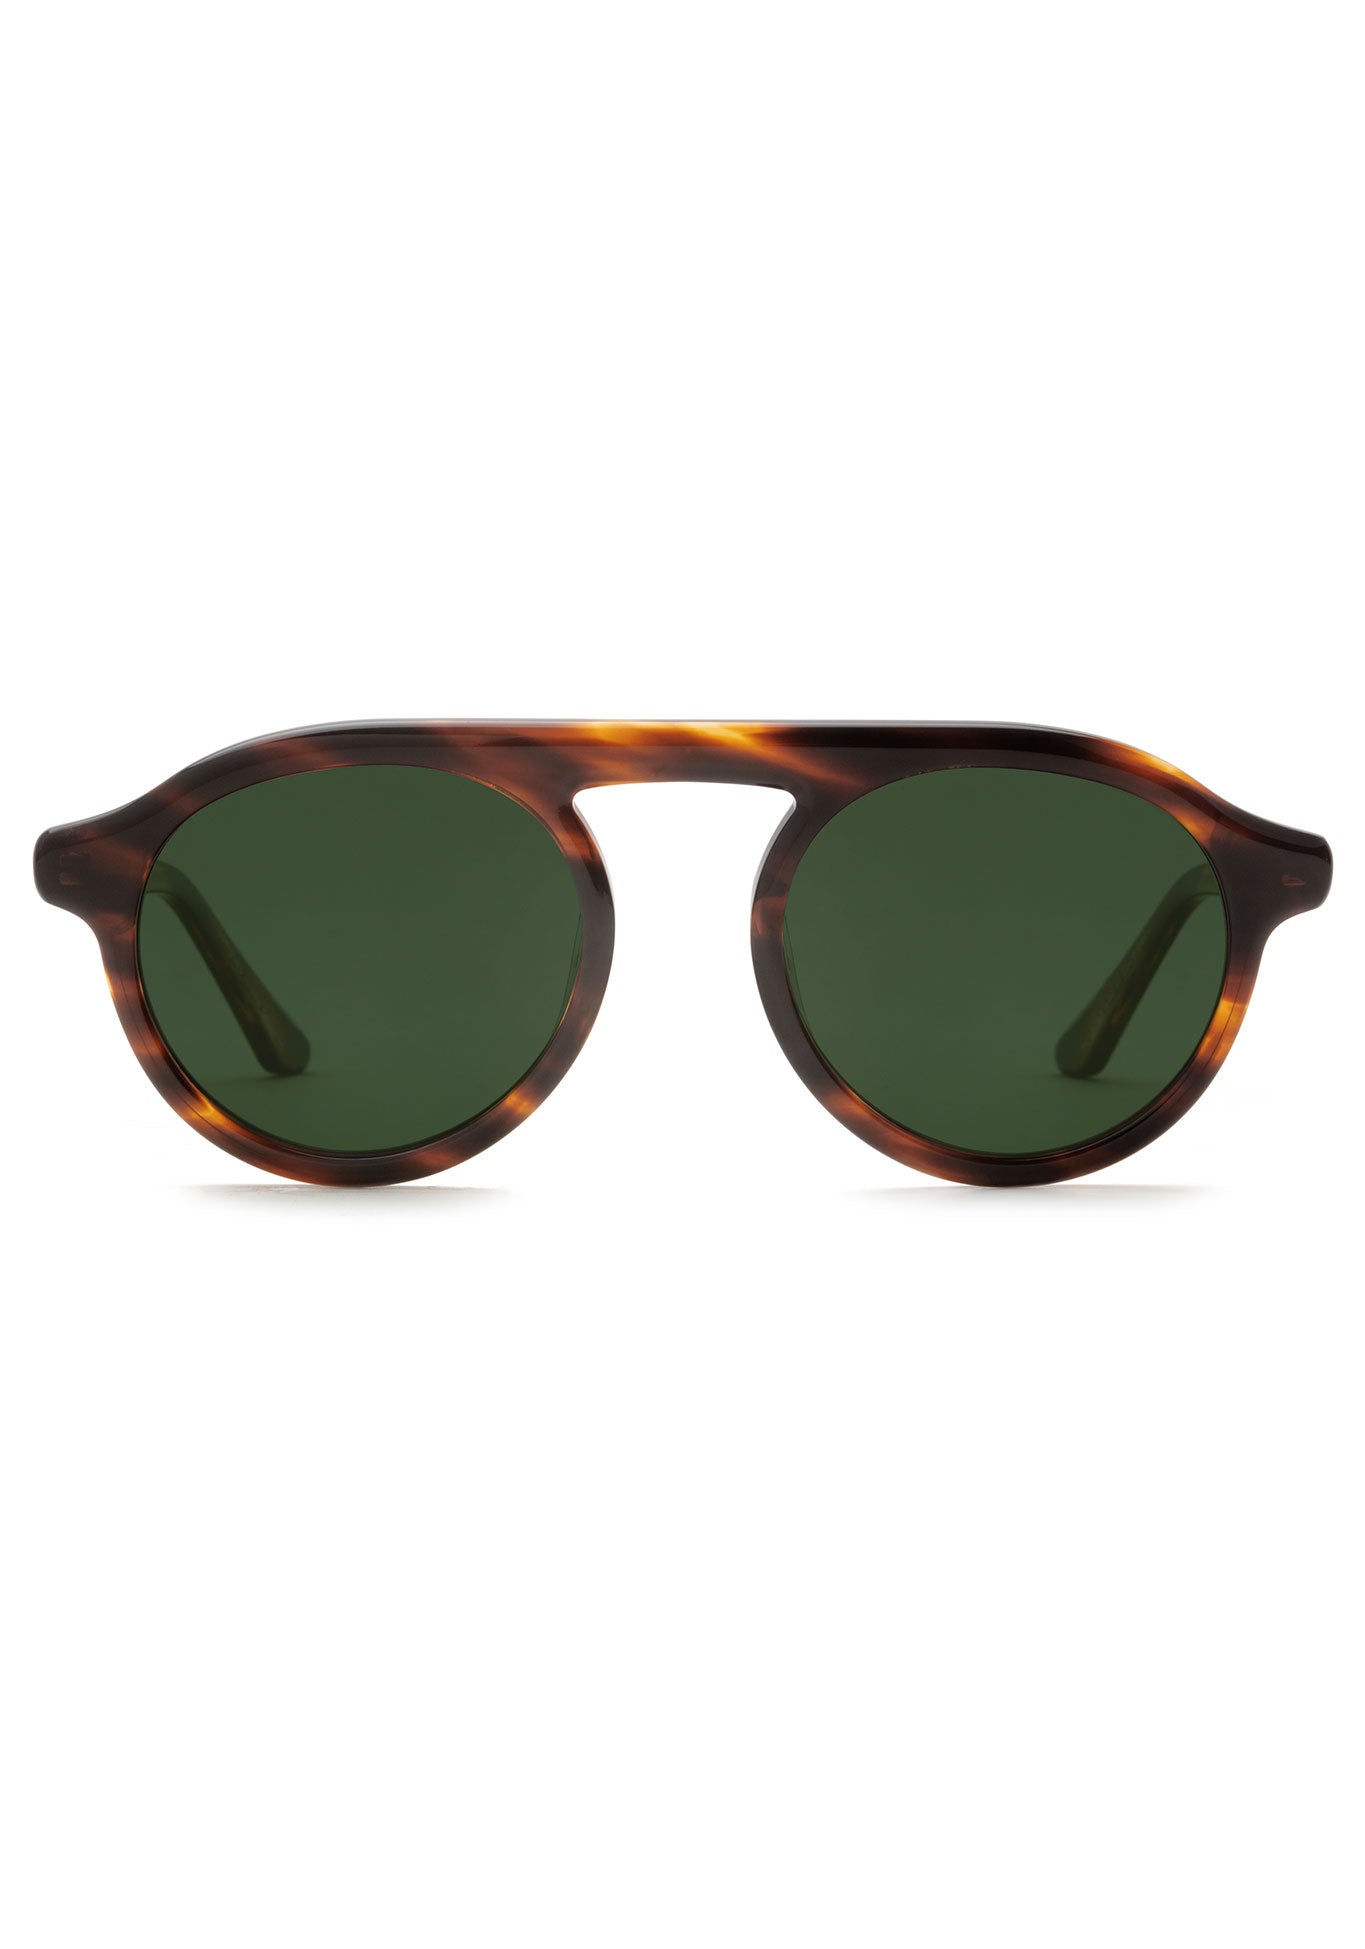 KREWE SUNGLASSES -  CAMERON | Hickory Polarized handcrafted, luxury brown acetate round sunglasses